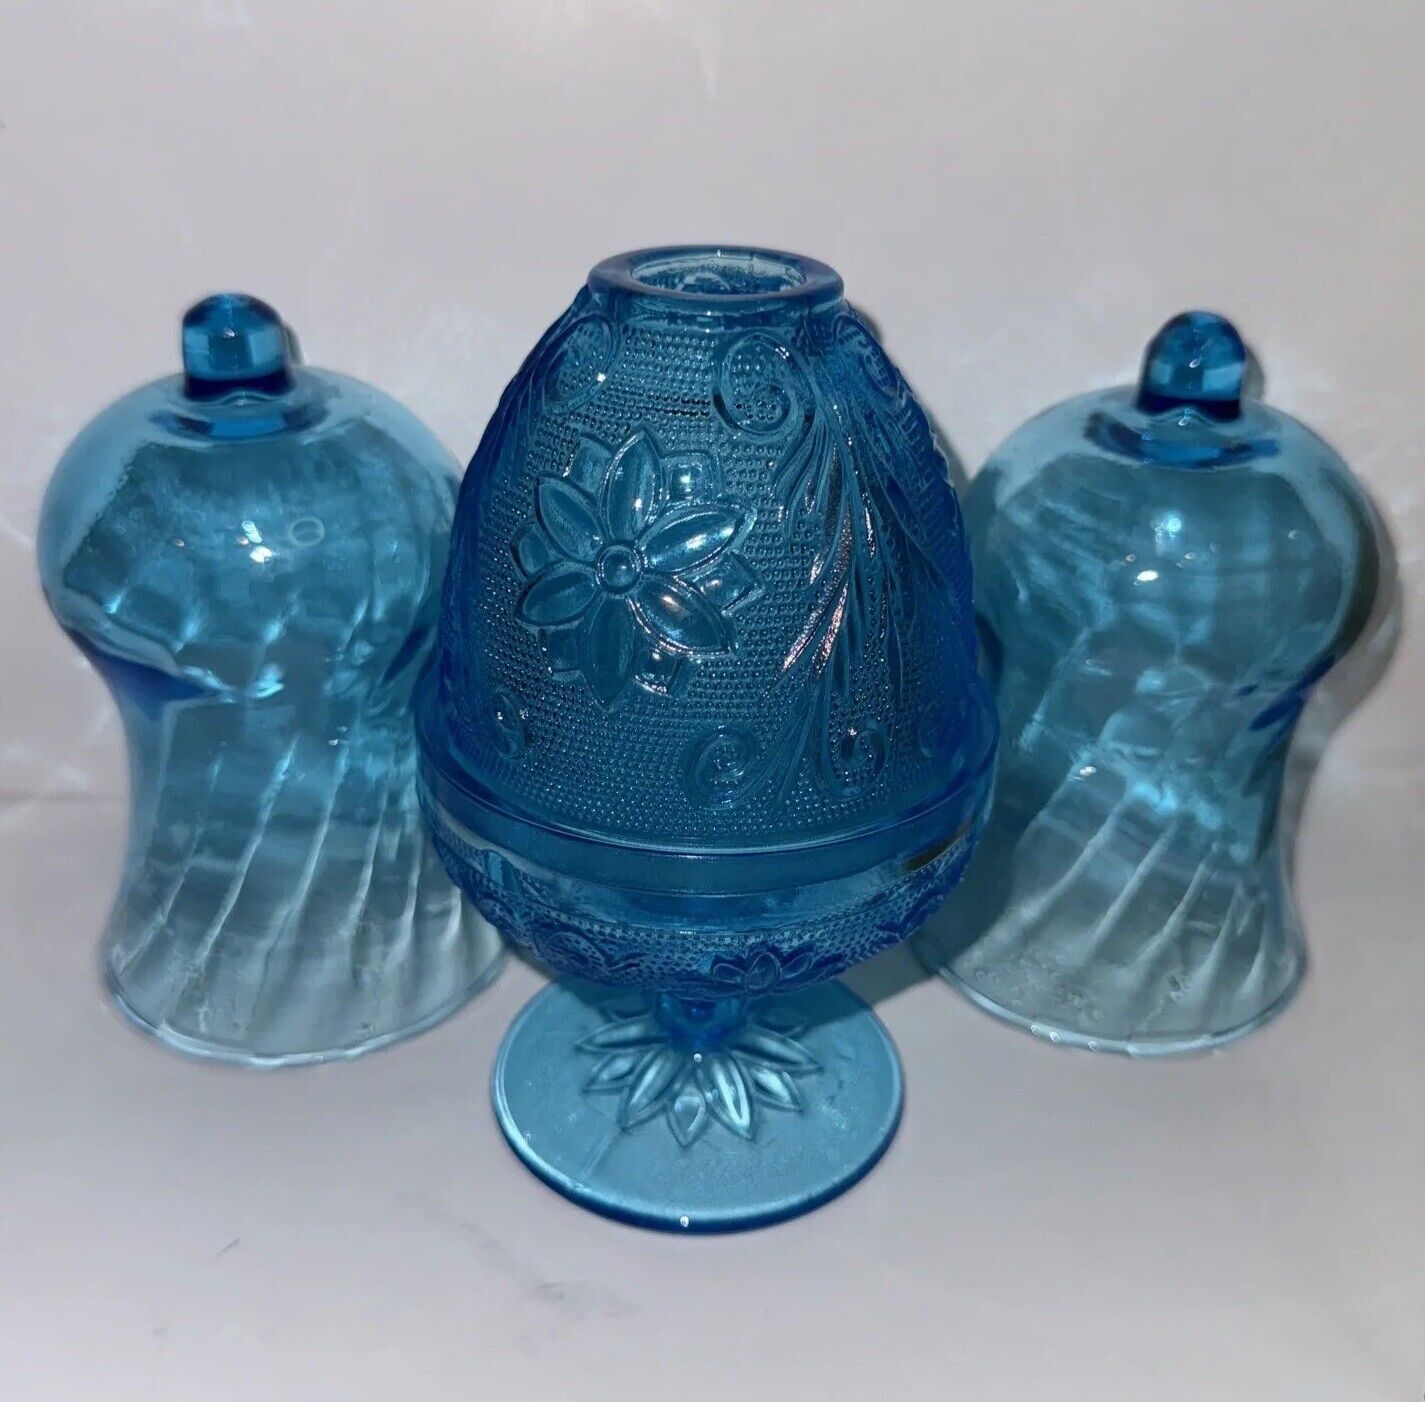 Vintage Tiara Glass Blue Chantilly Lace Fairy lamp - Candle Holders ORIGINAL BOX